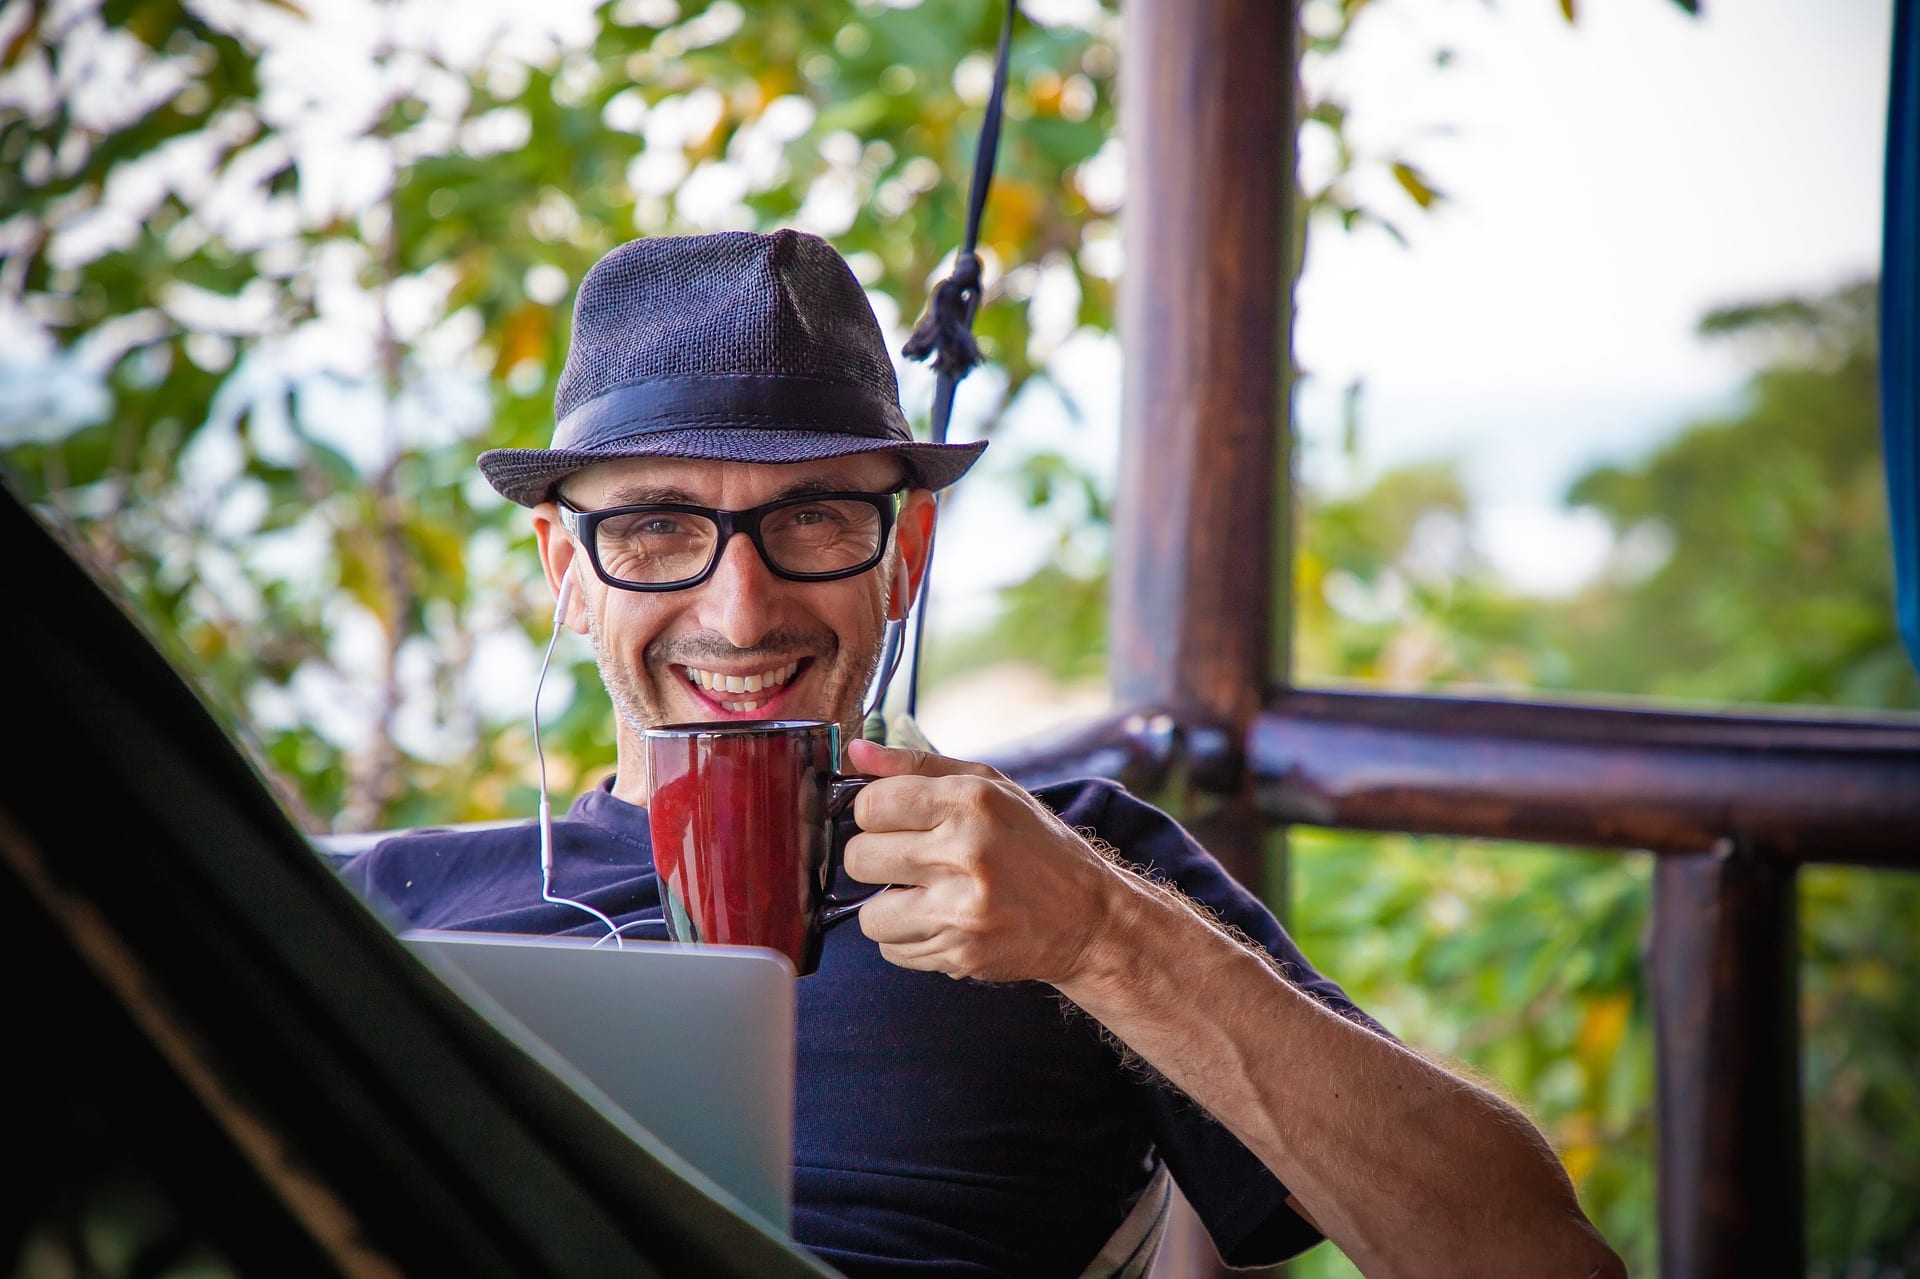  A man wearing a hat and glasses is smiling while holding a cup of coffee and looking at his laptop. The image represents the search query 'Tips to boost charisma without wearing gold amulets'.